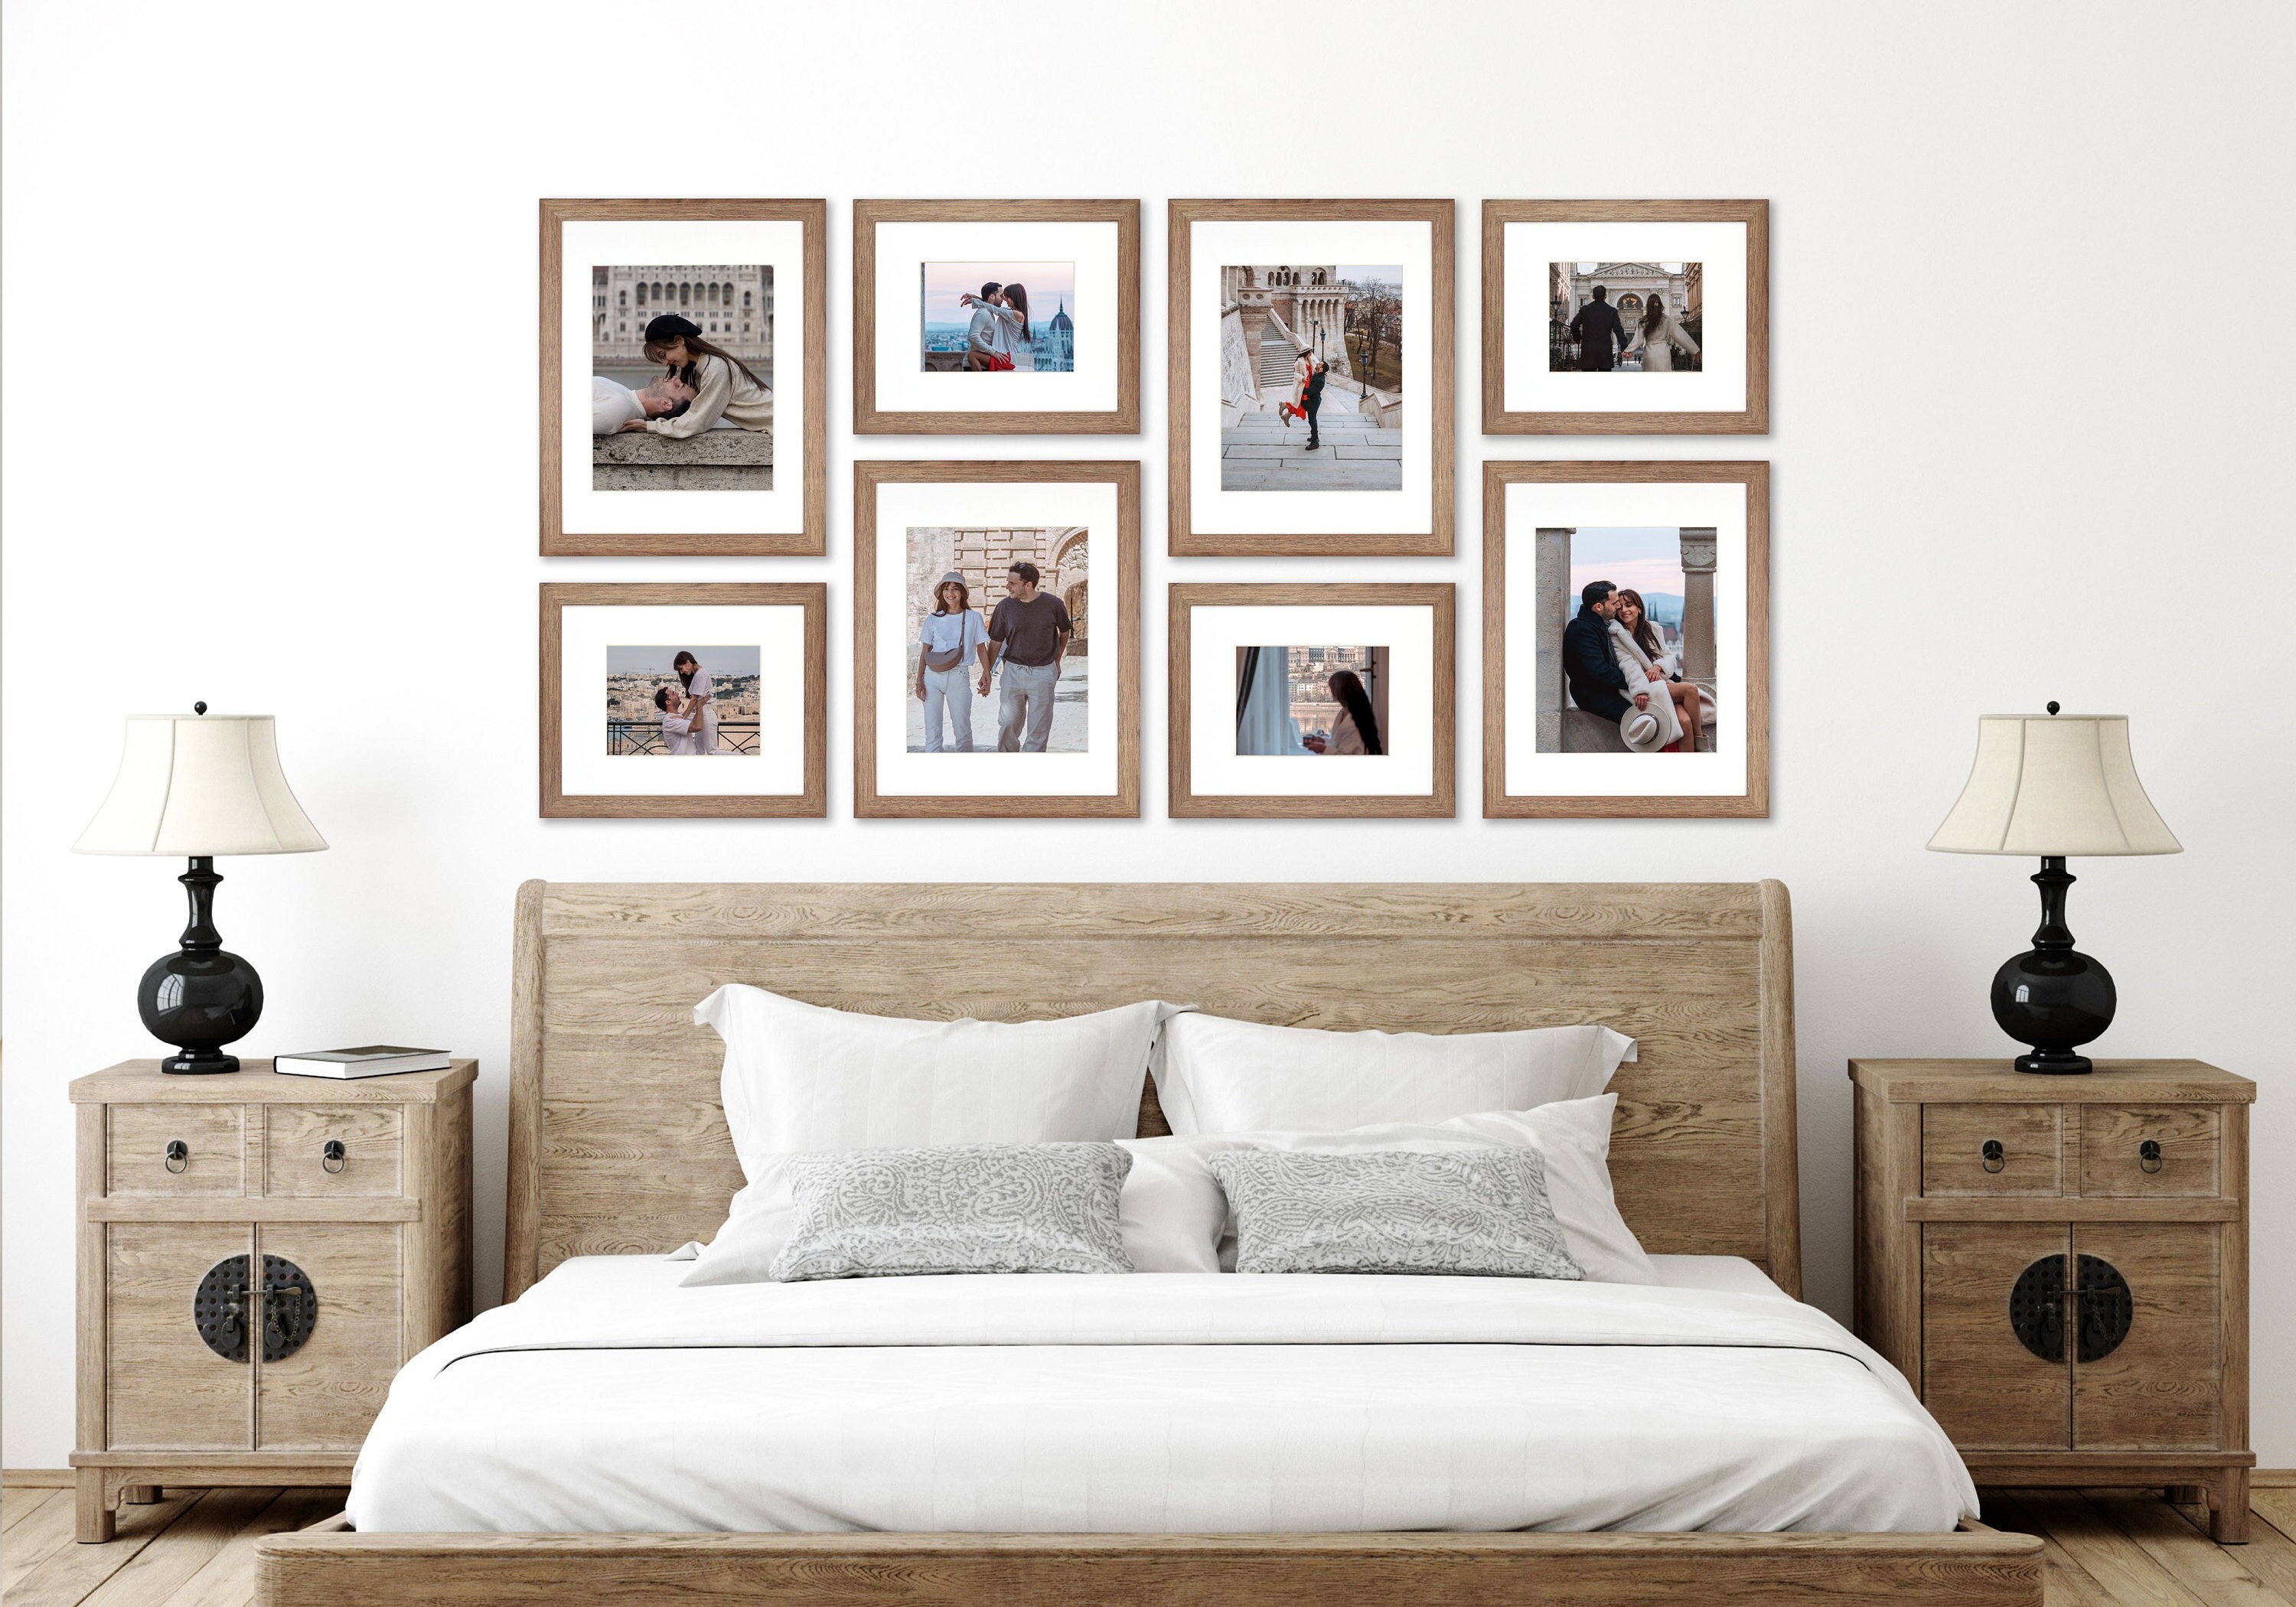 Ailise Gallery Wall Frame Set, Classic Metal Picture Frames for Wall or Tabletop Display (Set of 6) Latitude Run Color: Black, Picture Size: 11 x 14